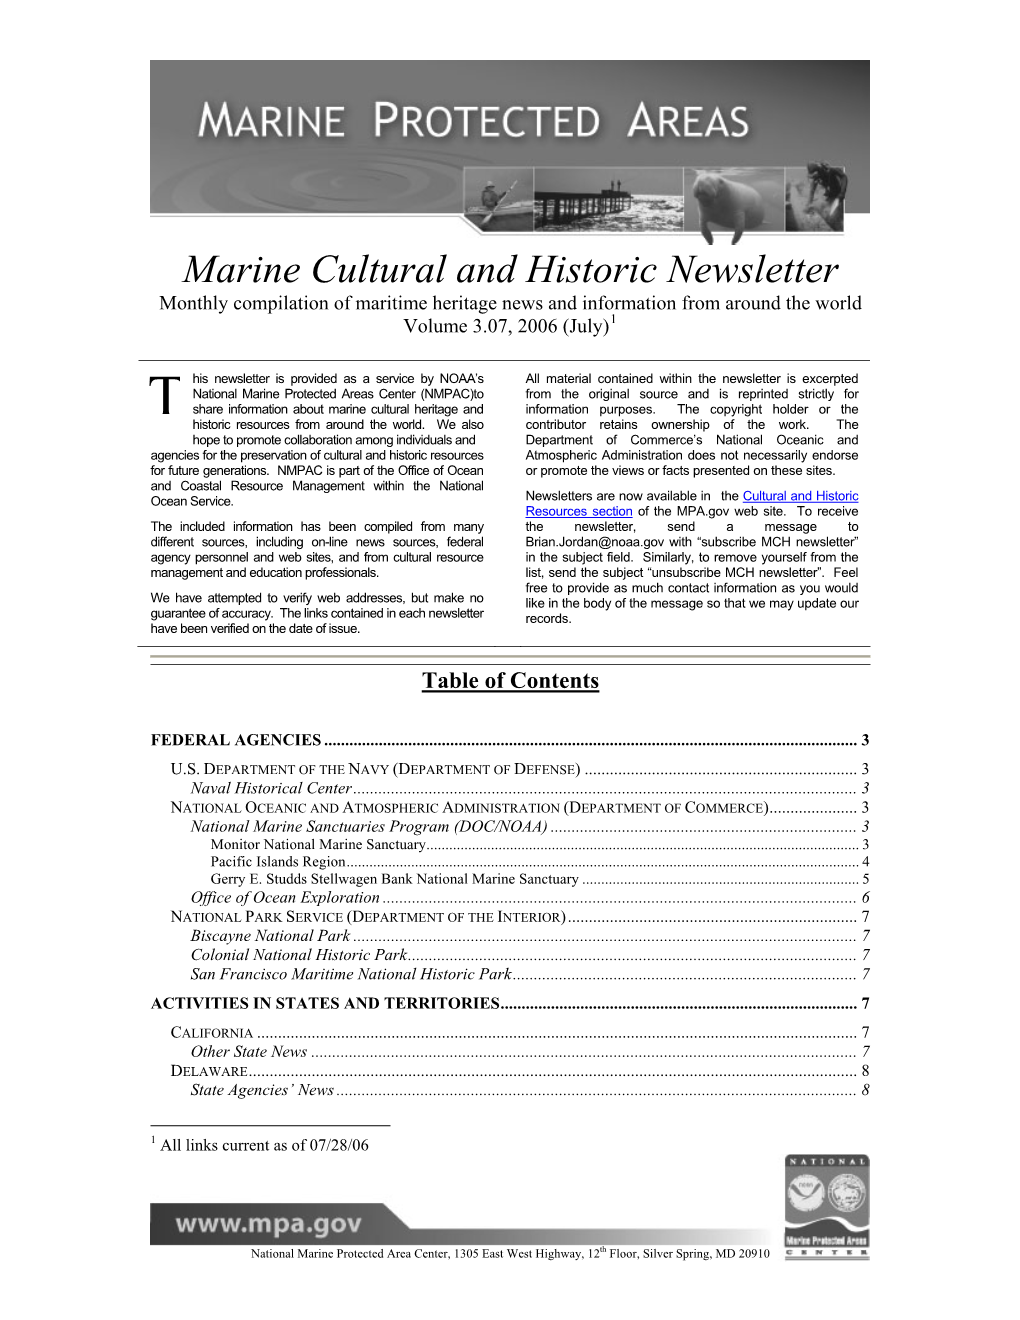 Marine Cultural and Historic Newsletter Vol 3(7)